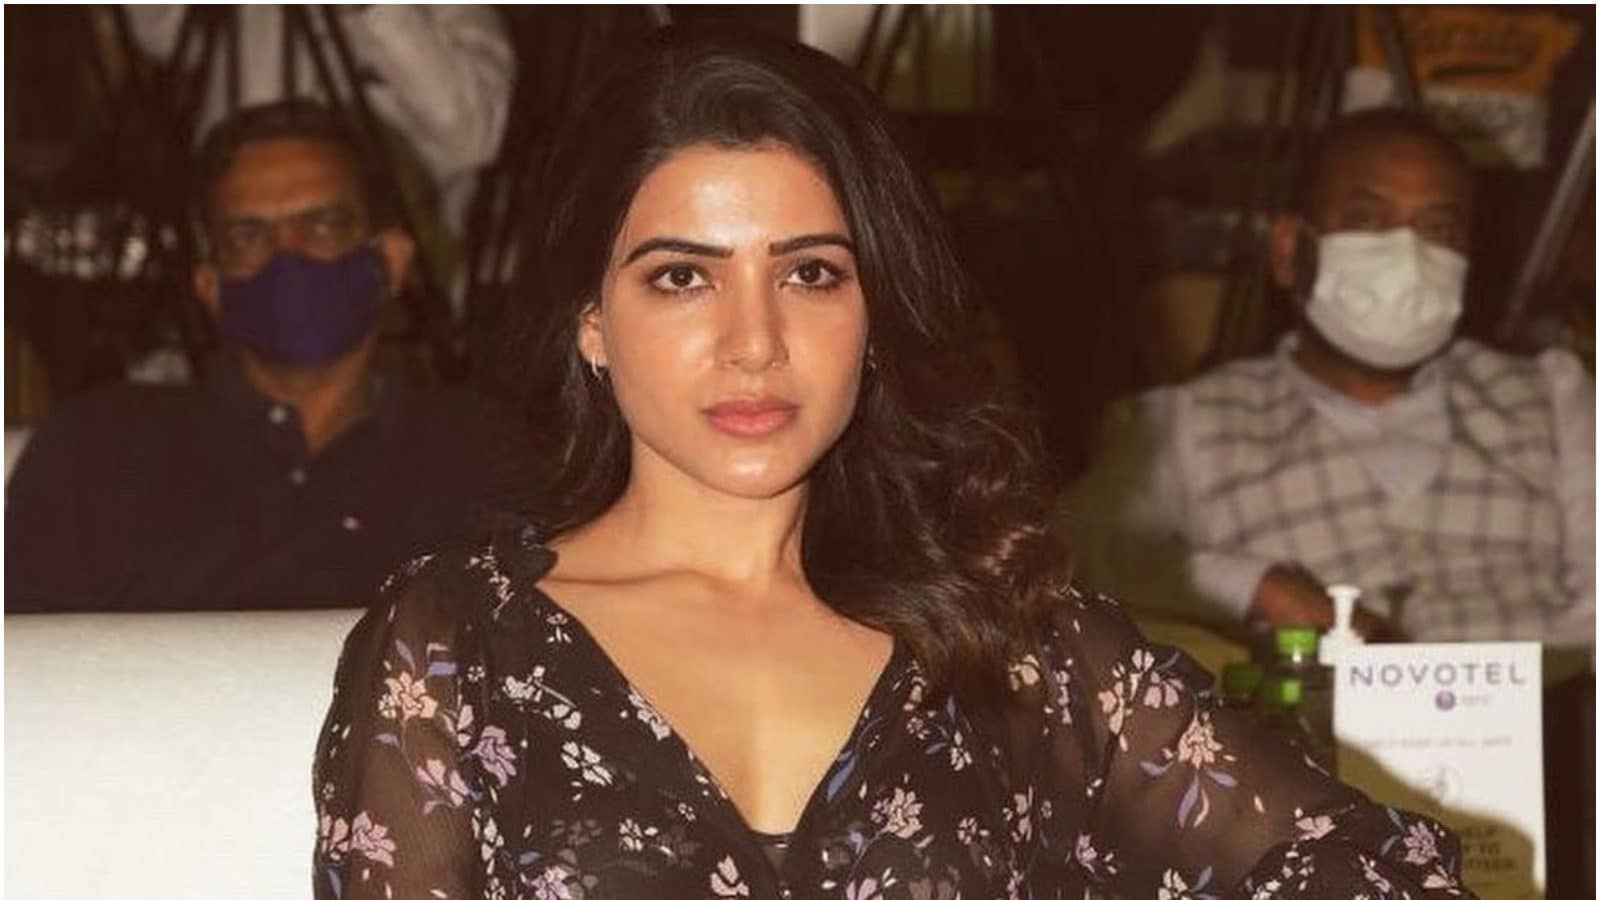 Samantha Charging Rs 1.5 Crore for First Ever Dance Number in Allu Arjun’s Film, Says Report